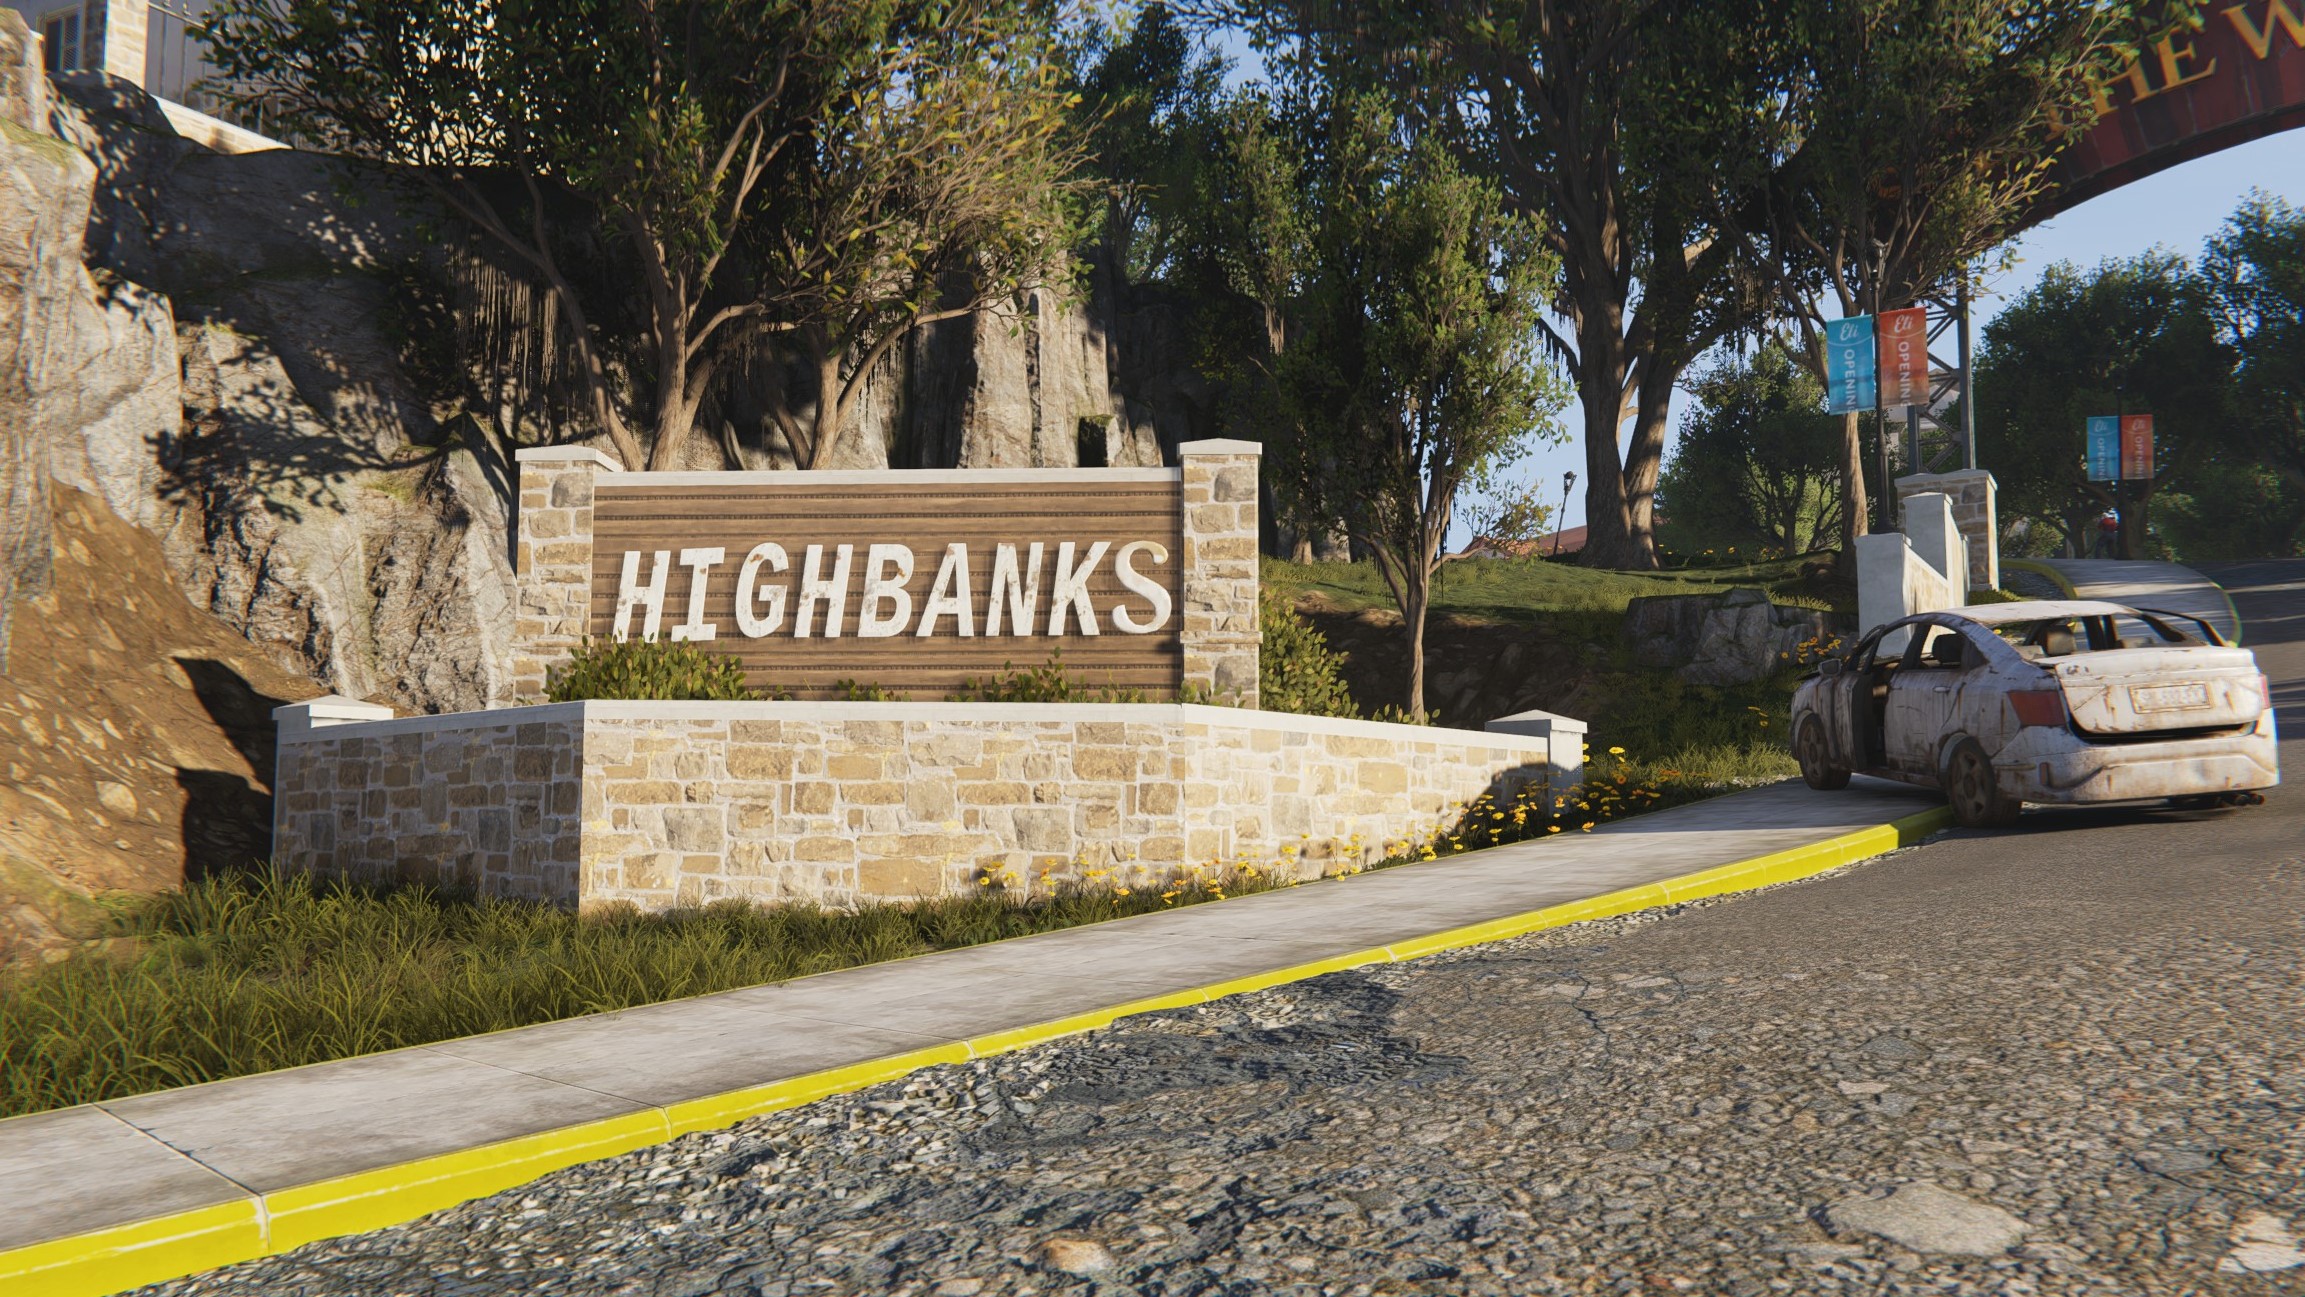  Where to find the High Banks weapon and gear crates in Once Human 